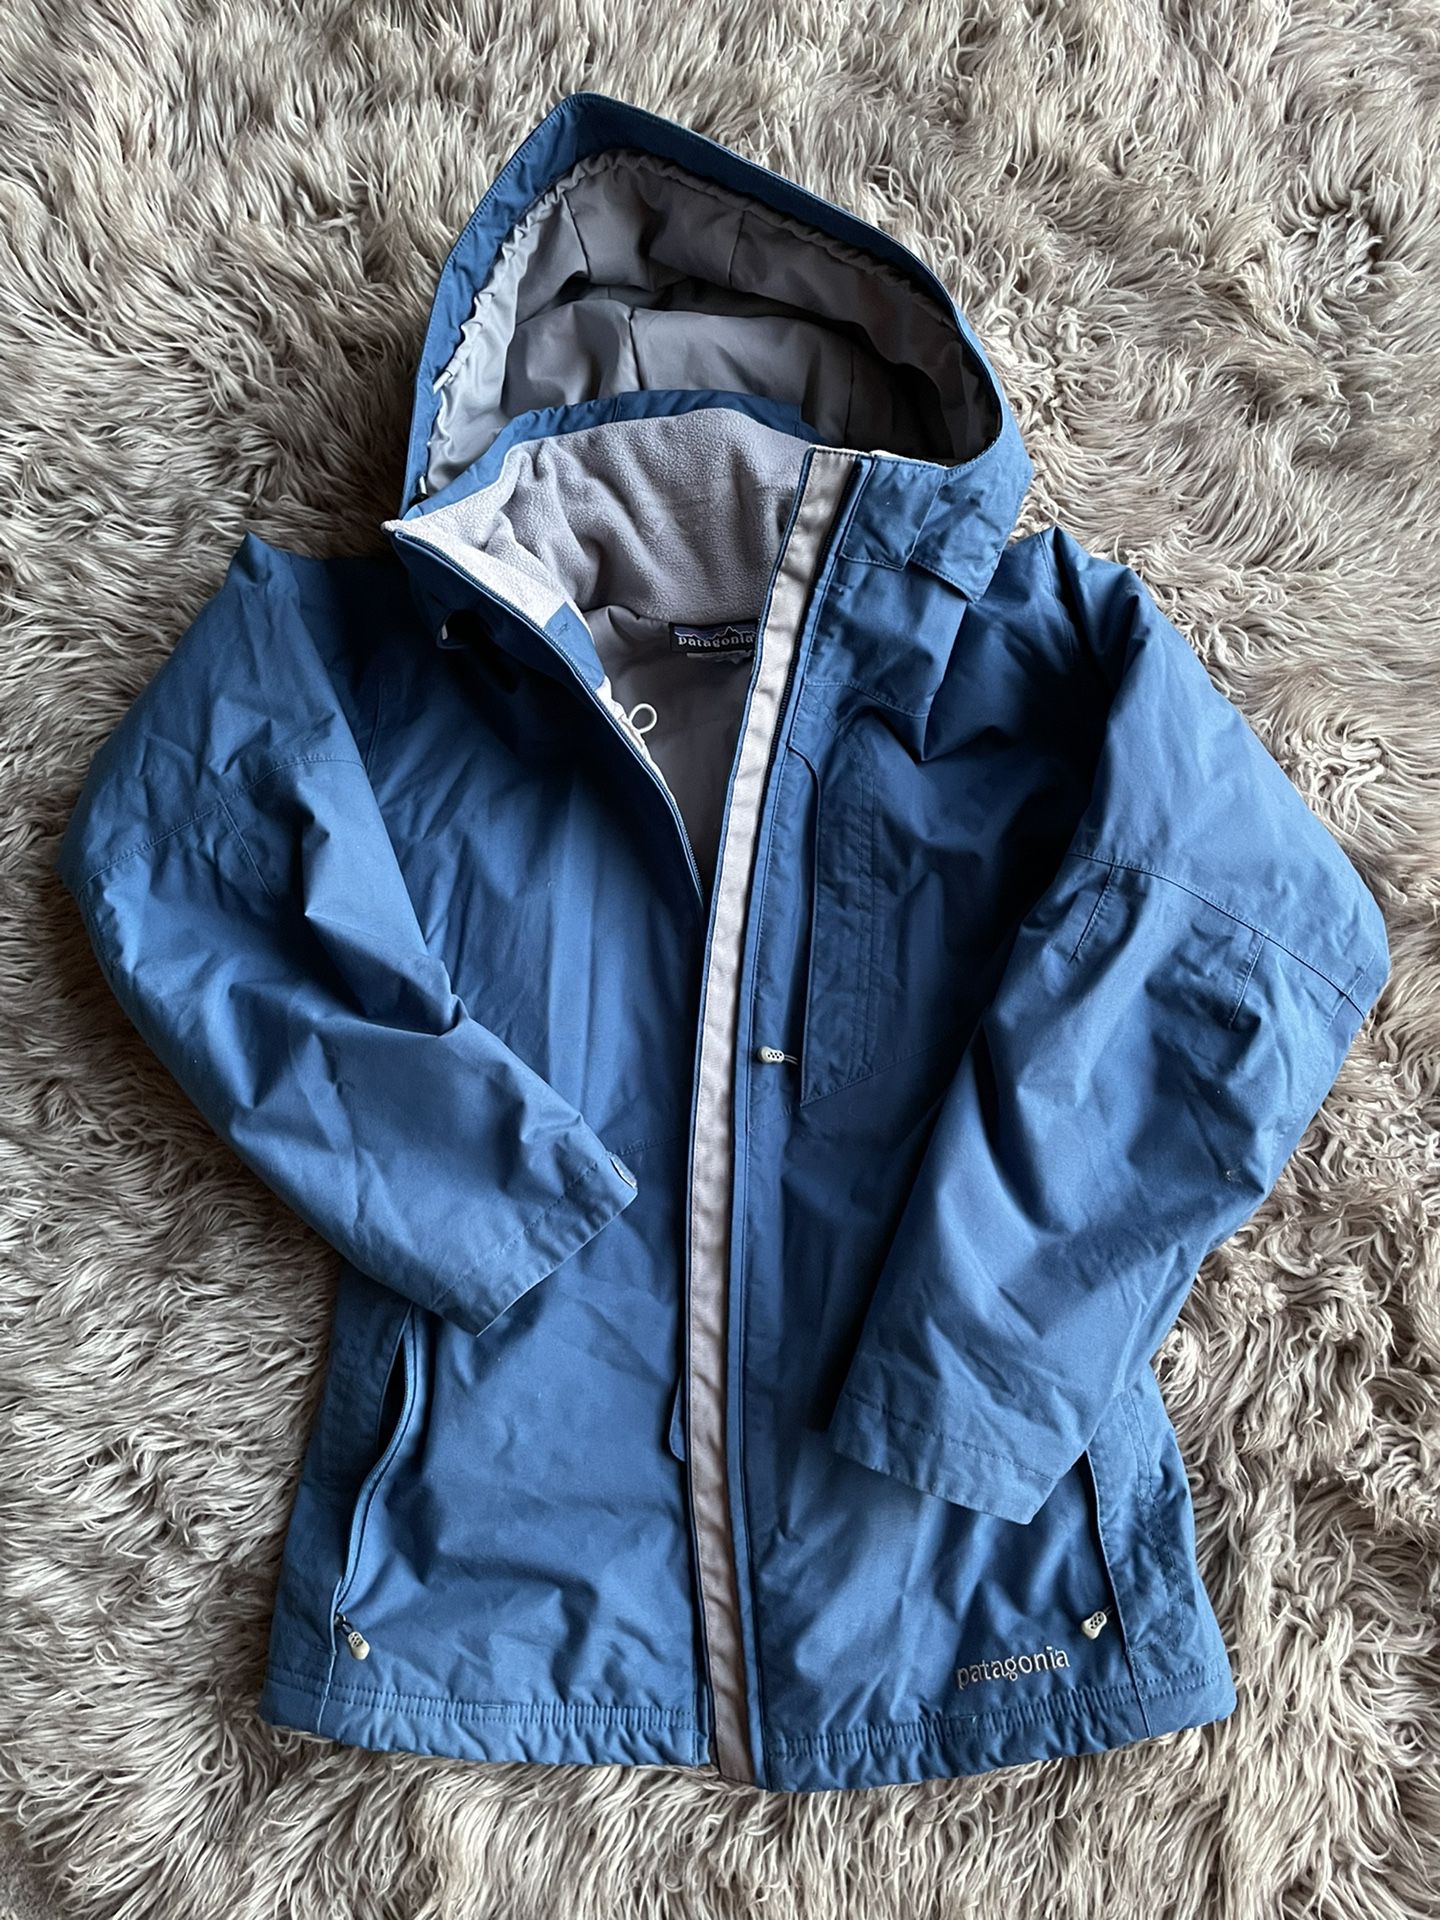 Patagonia Womens Insulated Jacket Waterproof Size XS Blue